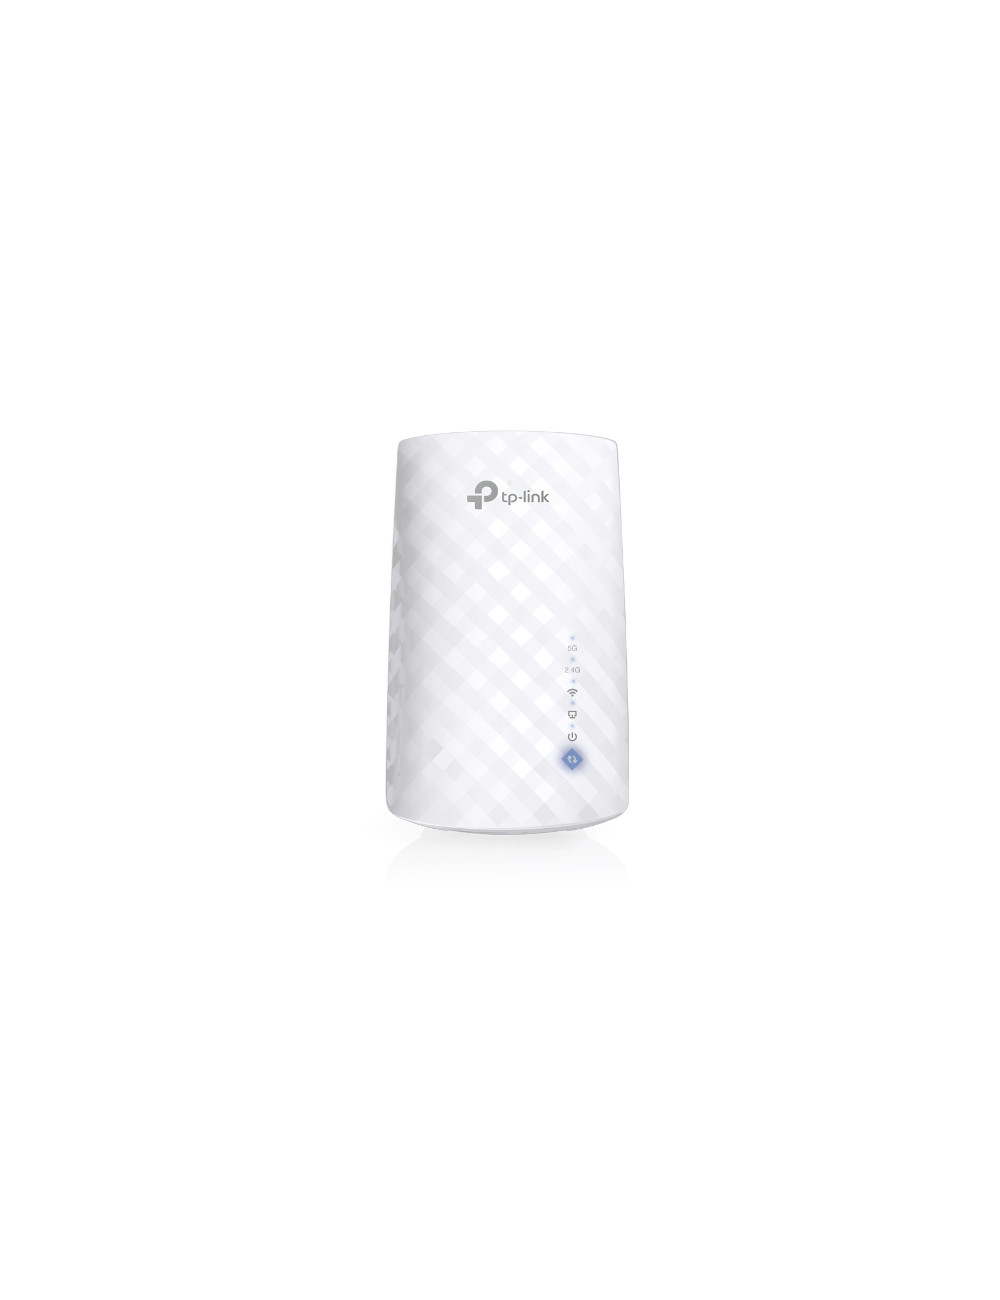 TP-LINK Extender RE190 802.11ac, 2.4GHz/5GHz, 300+433 Mbit/s, Antenna type 3 Omni-directional